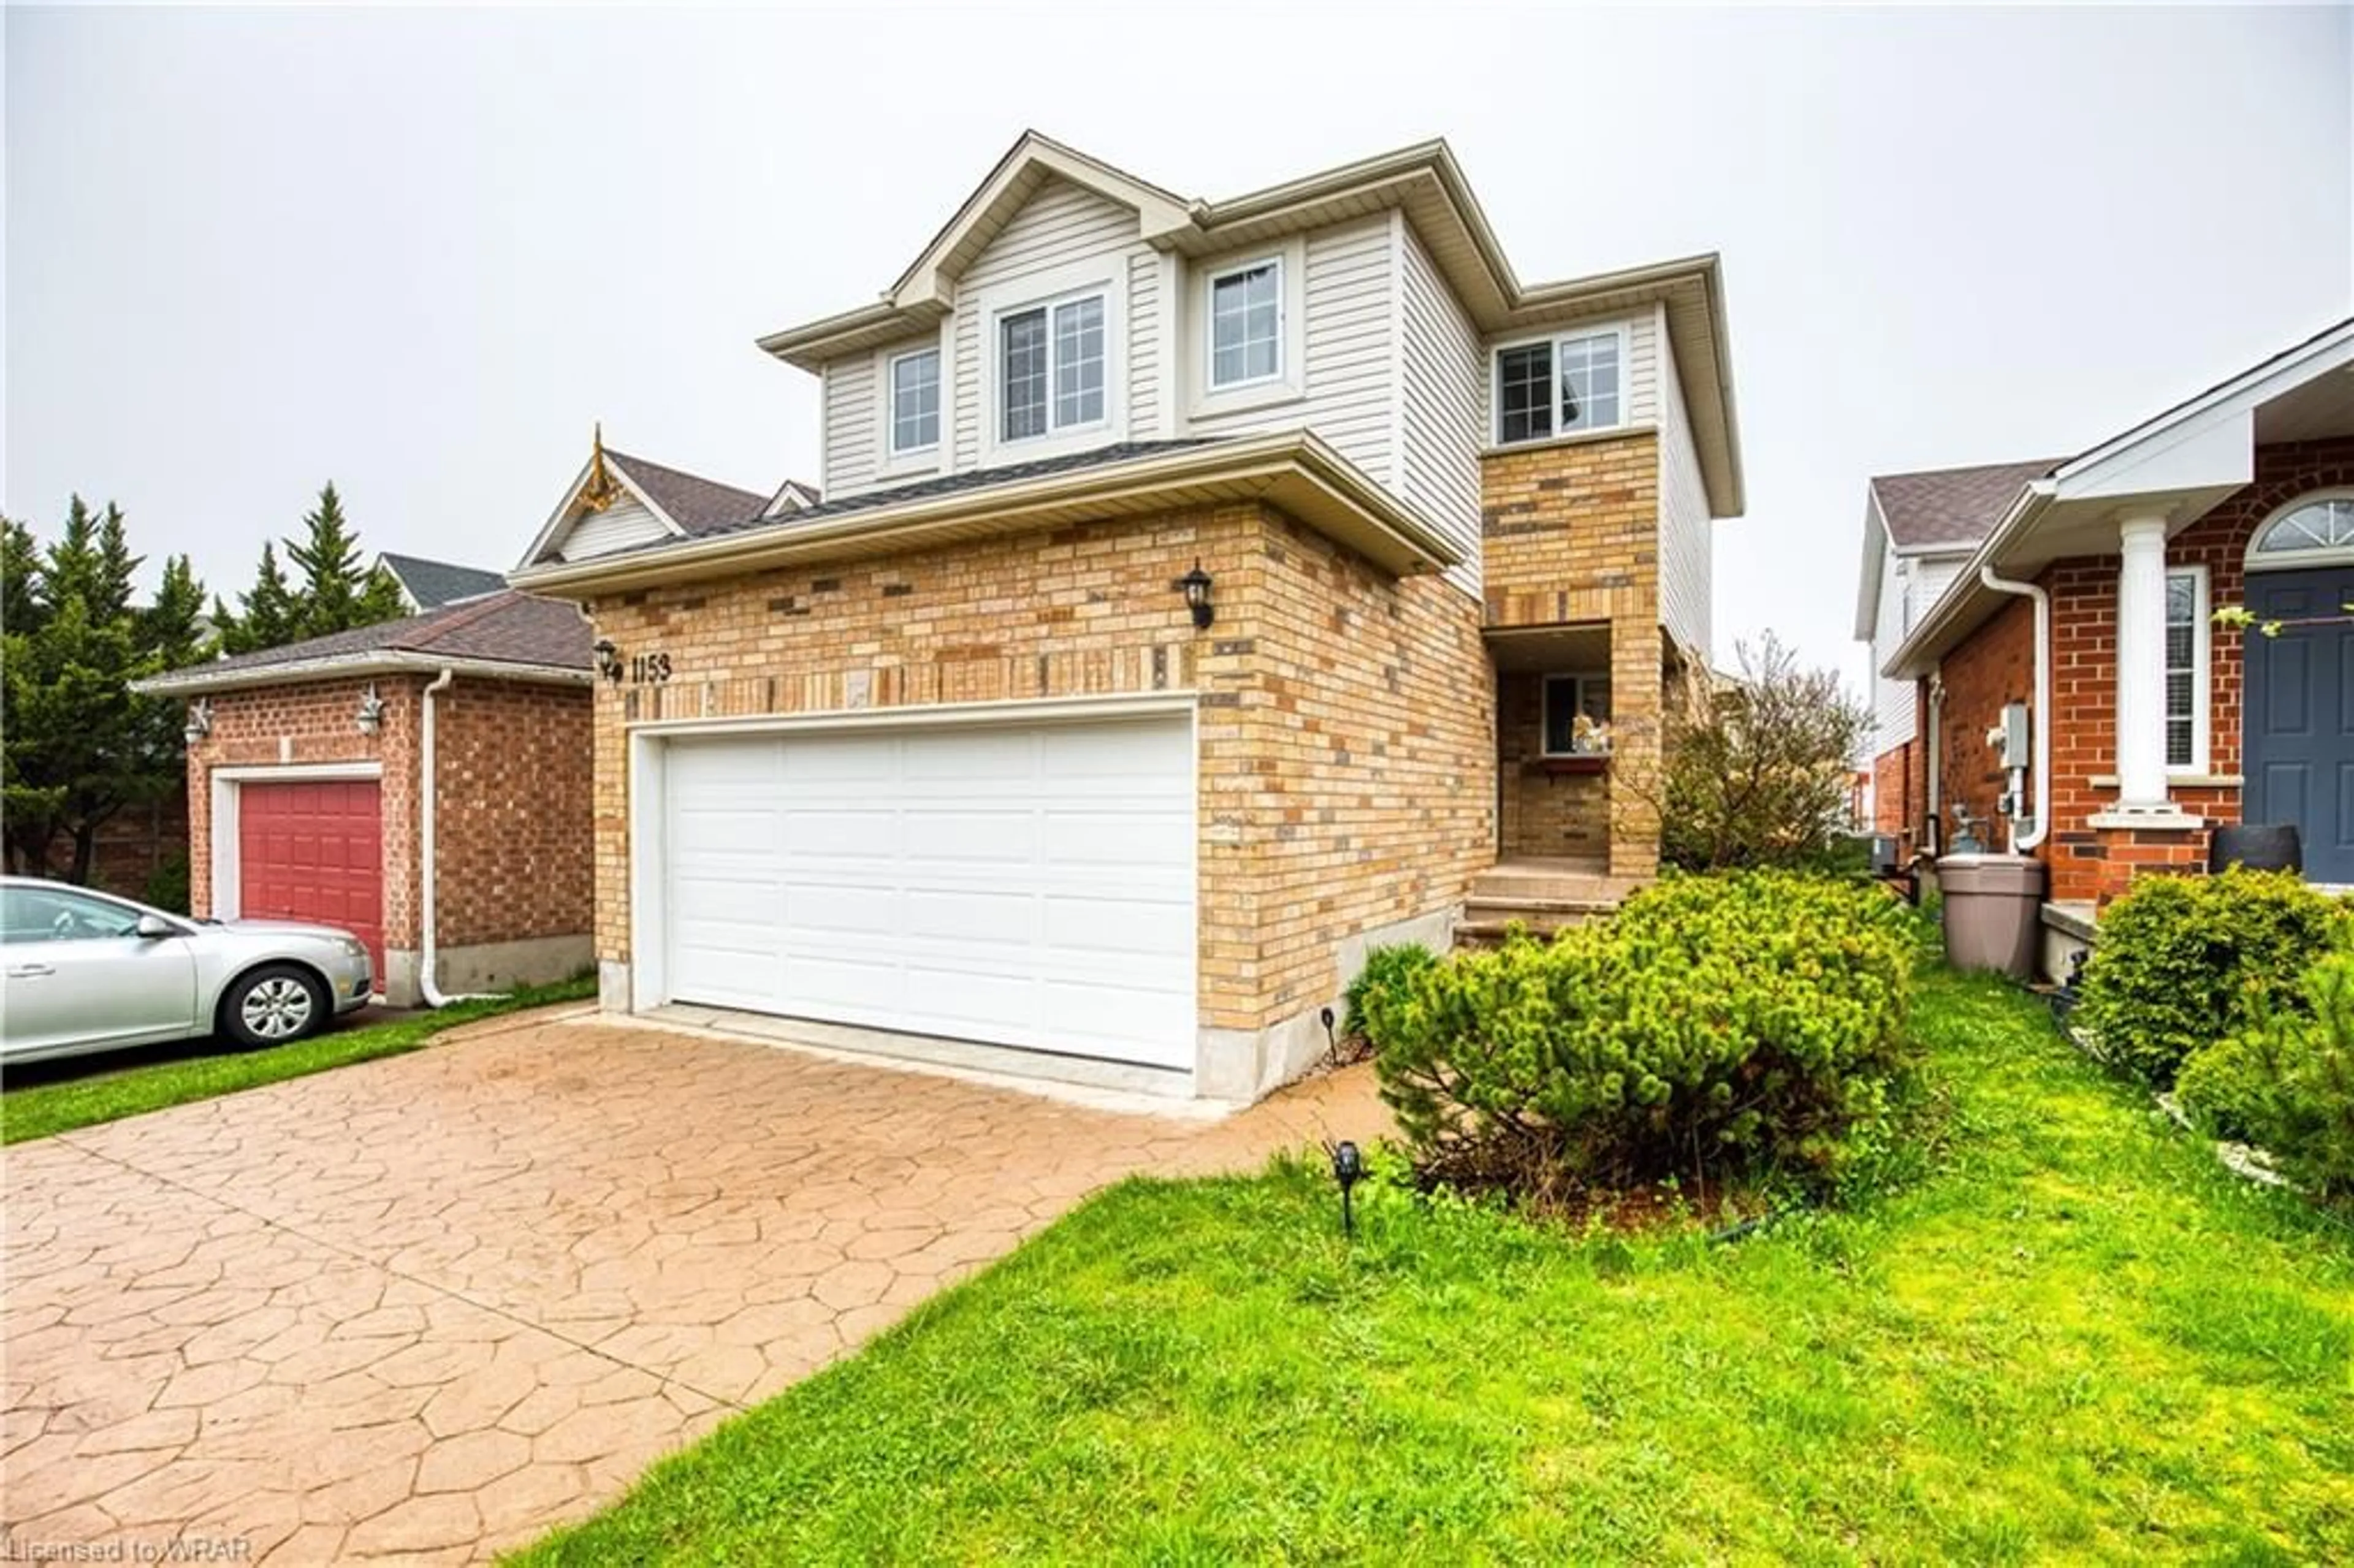 Home with brick exterior material for 1153 Countrystone Dr, Kitchener Ontario N2N 3H4